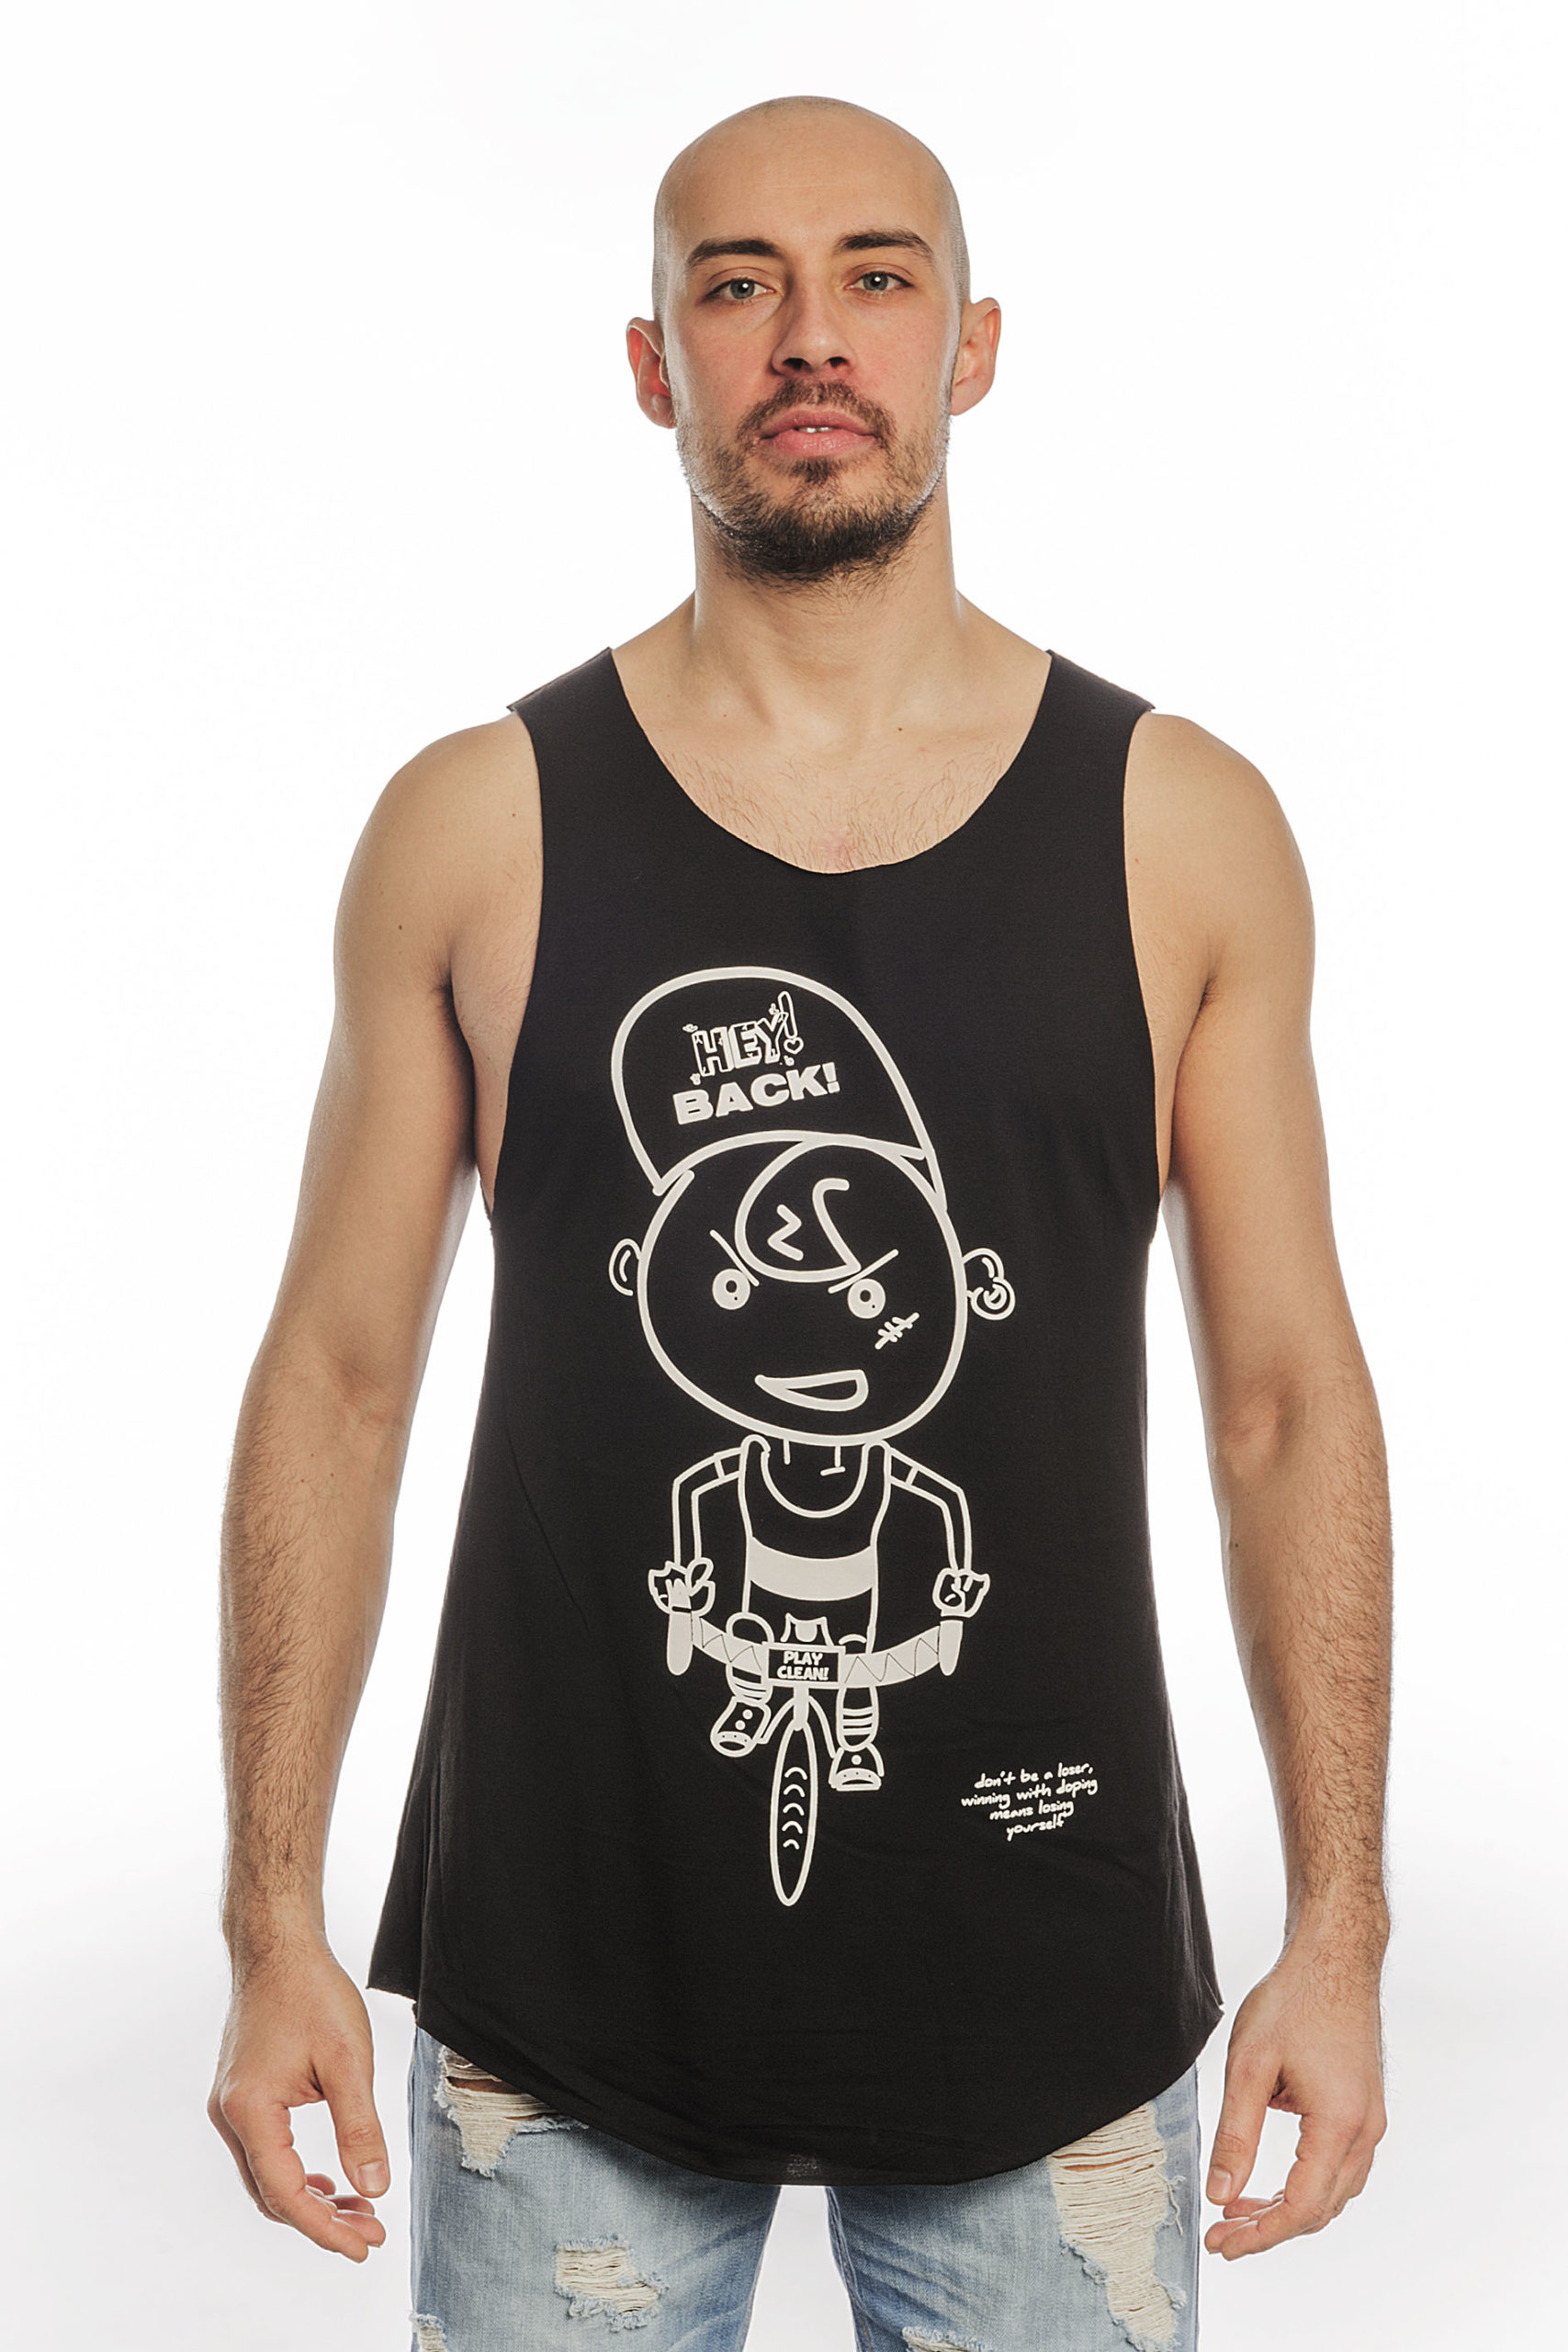 BLACK TANK MAN CYCLING HEY! BACK! SUMMER17 COLLECTION